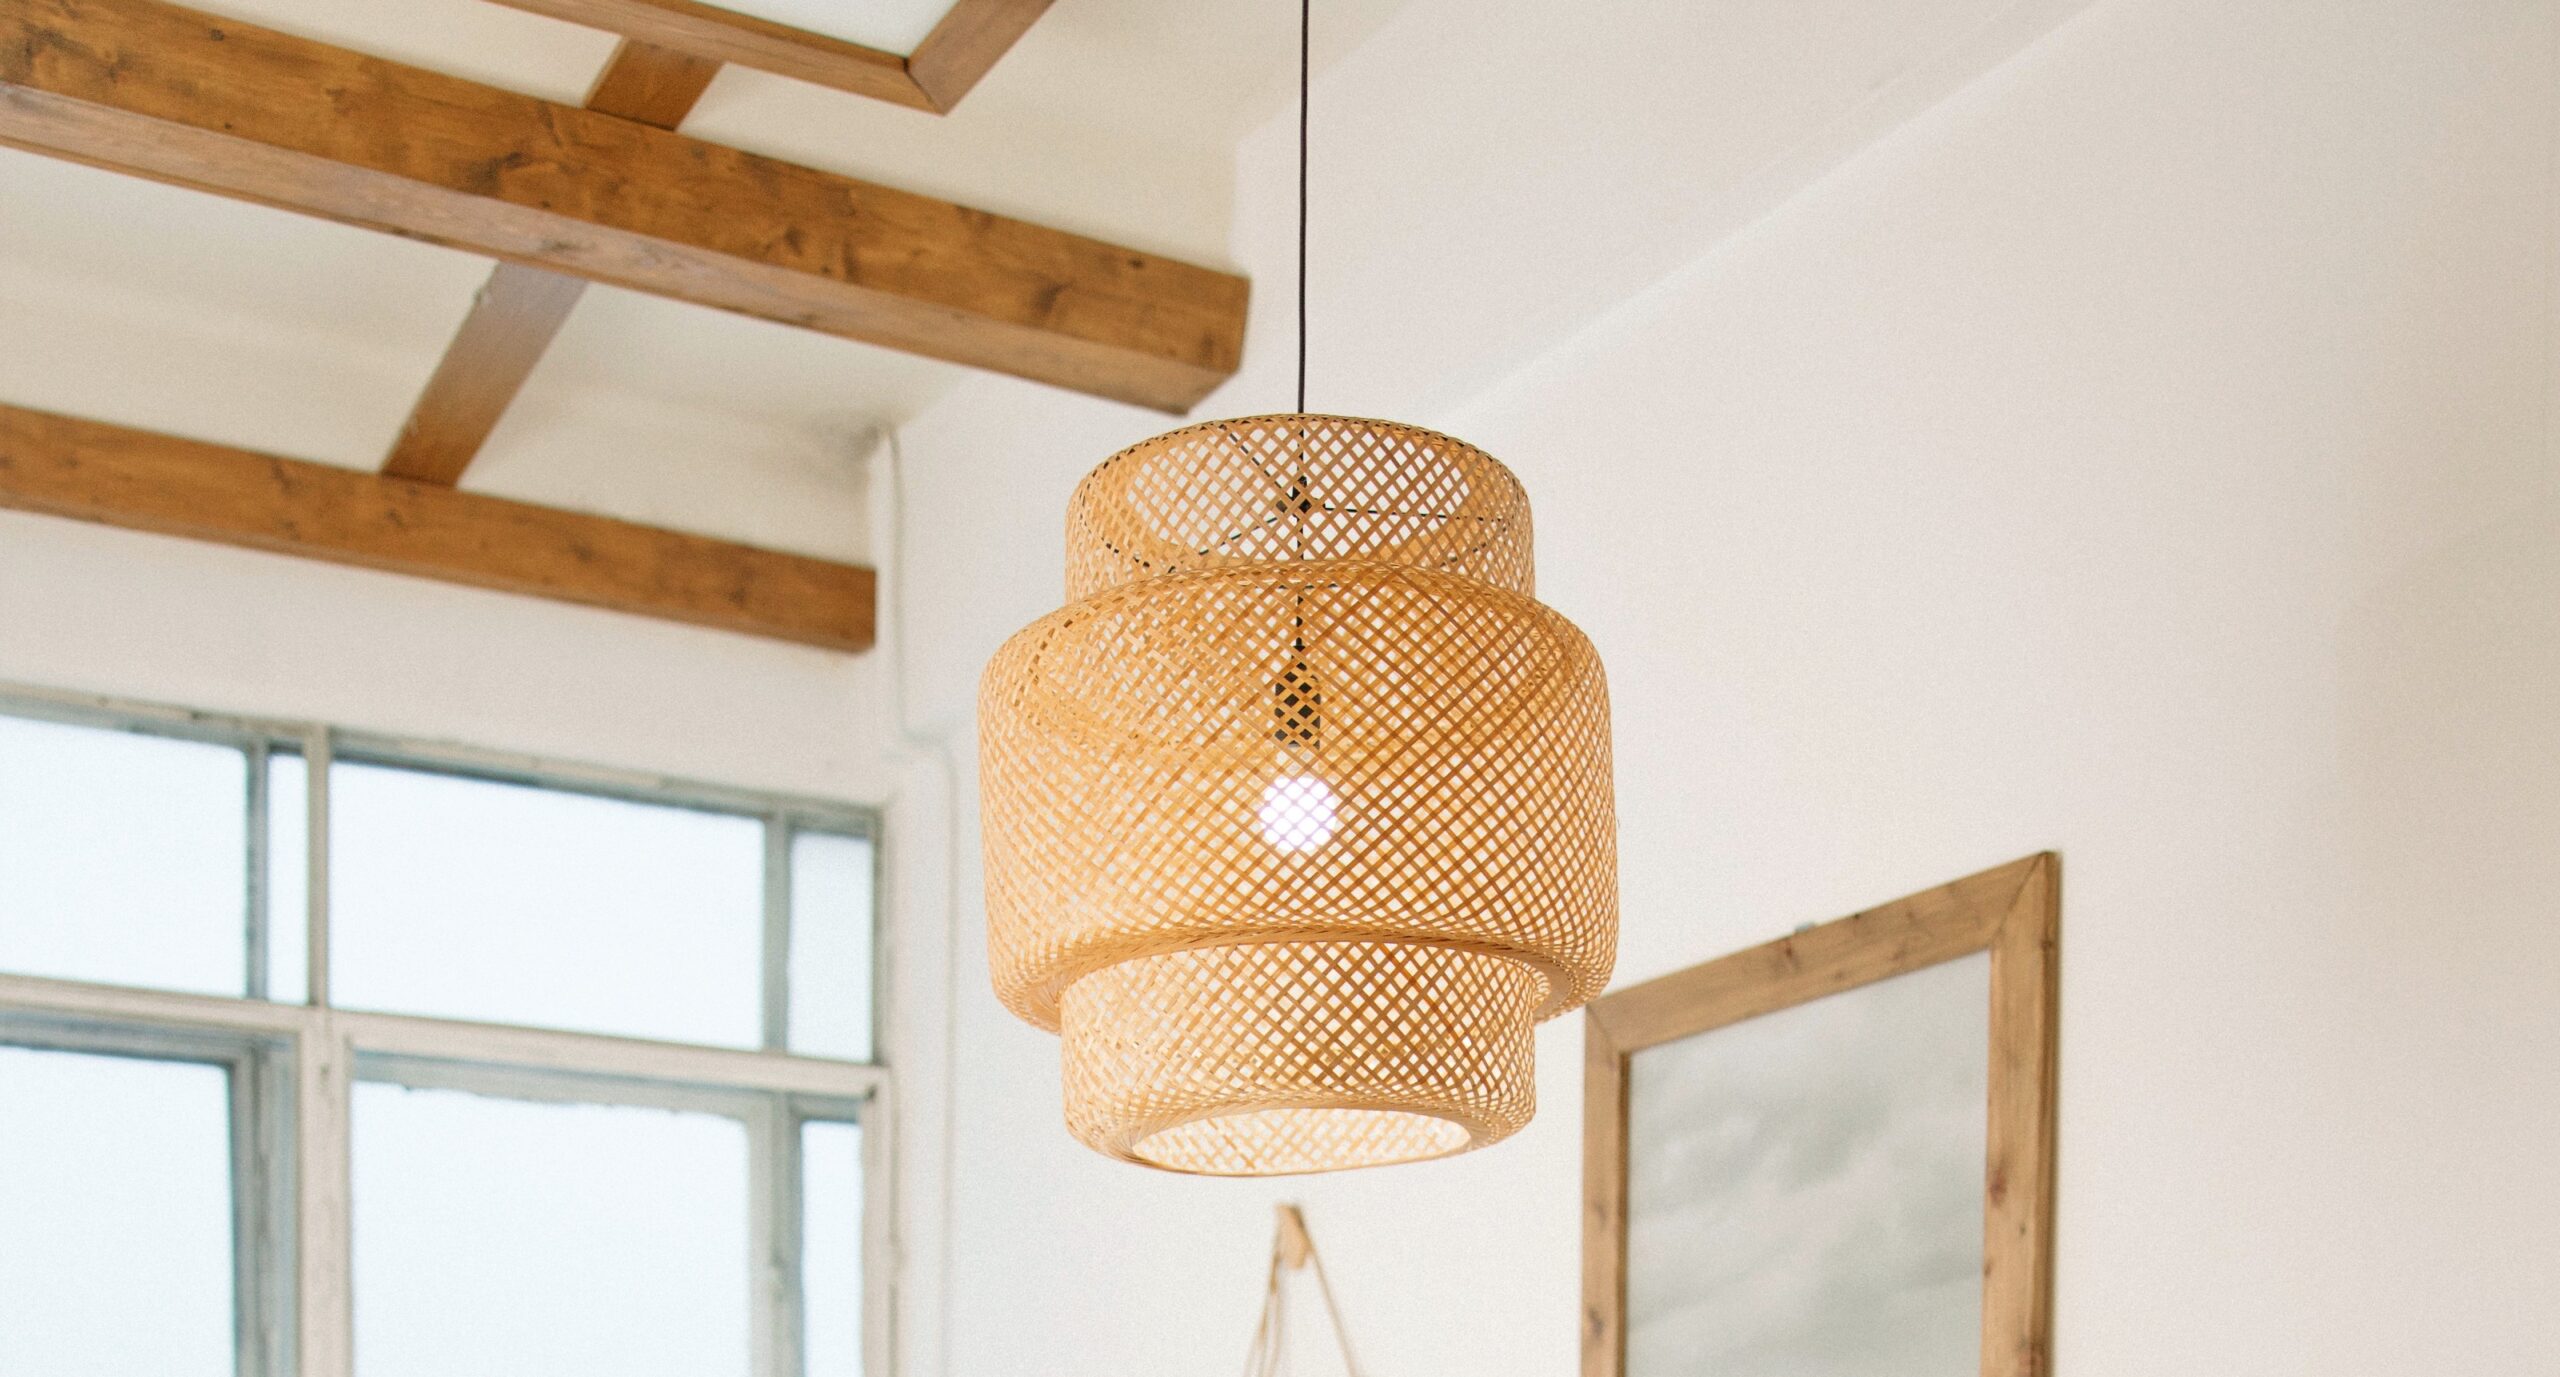 A stunning wicker pendant light is brightening a white bedroom with visible clear wood beams on the ceiling and light pouring in from an unadorned window.